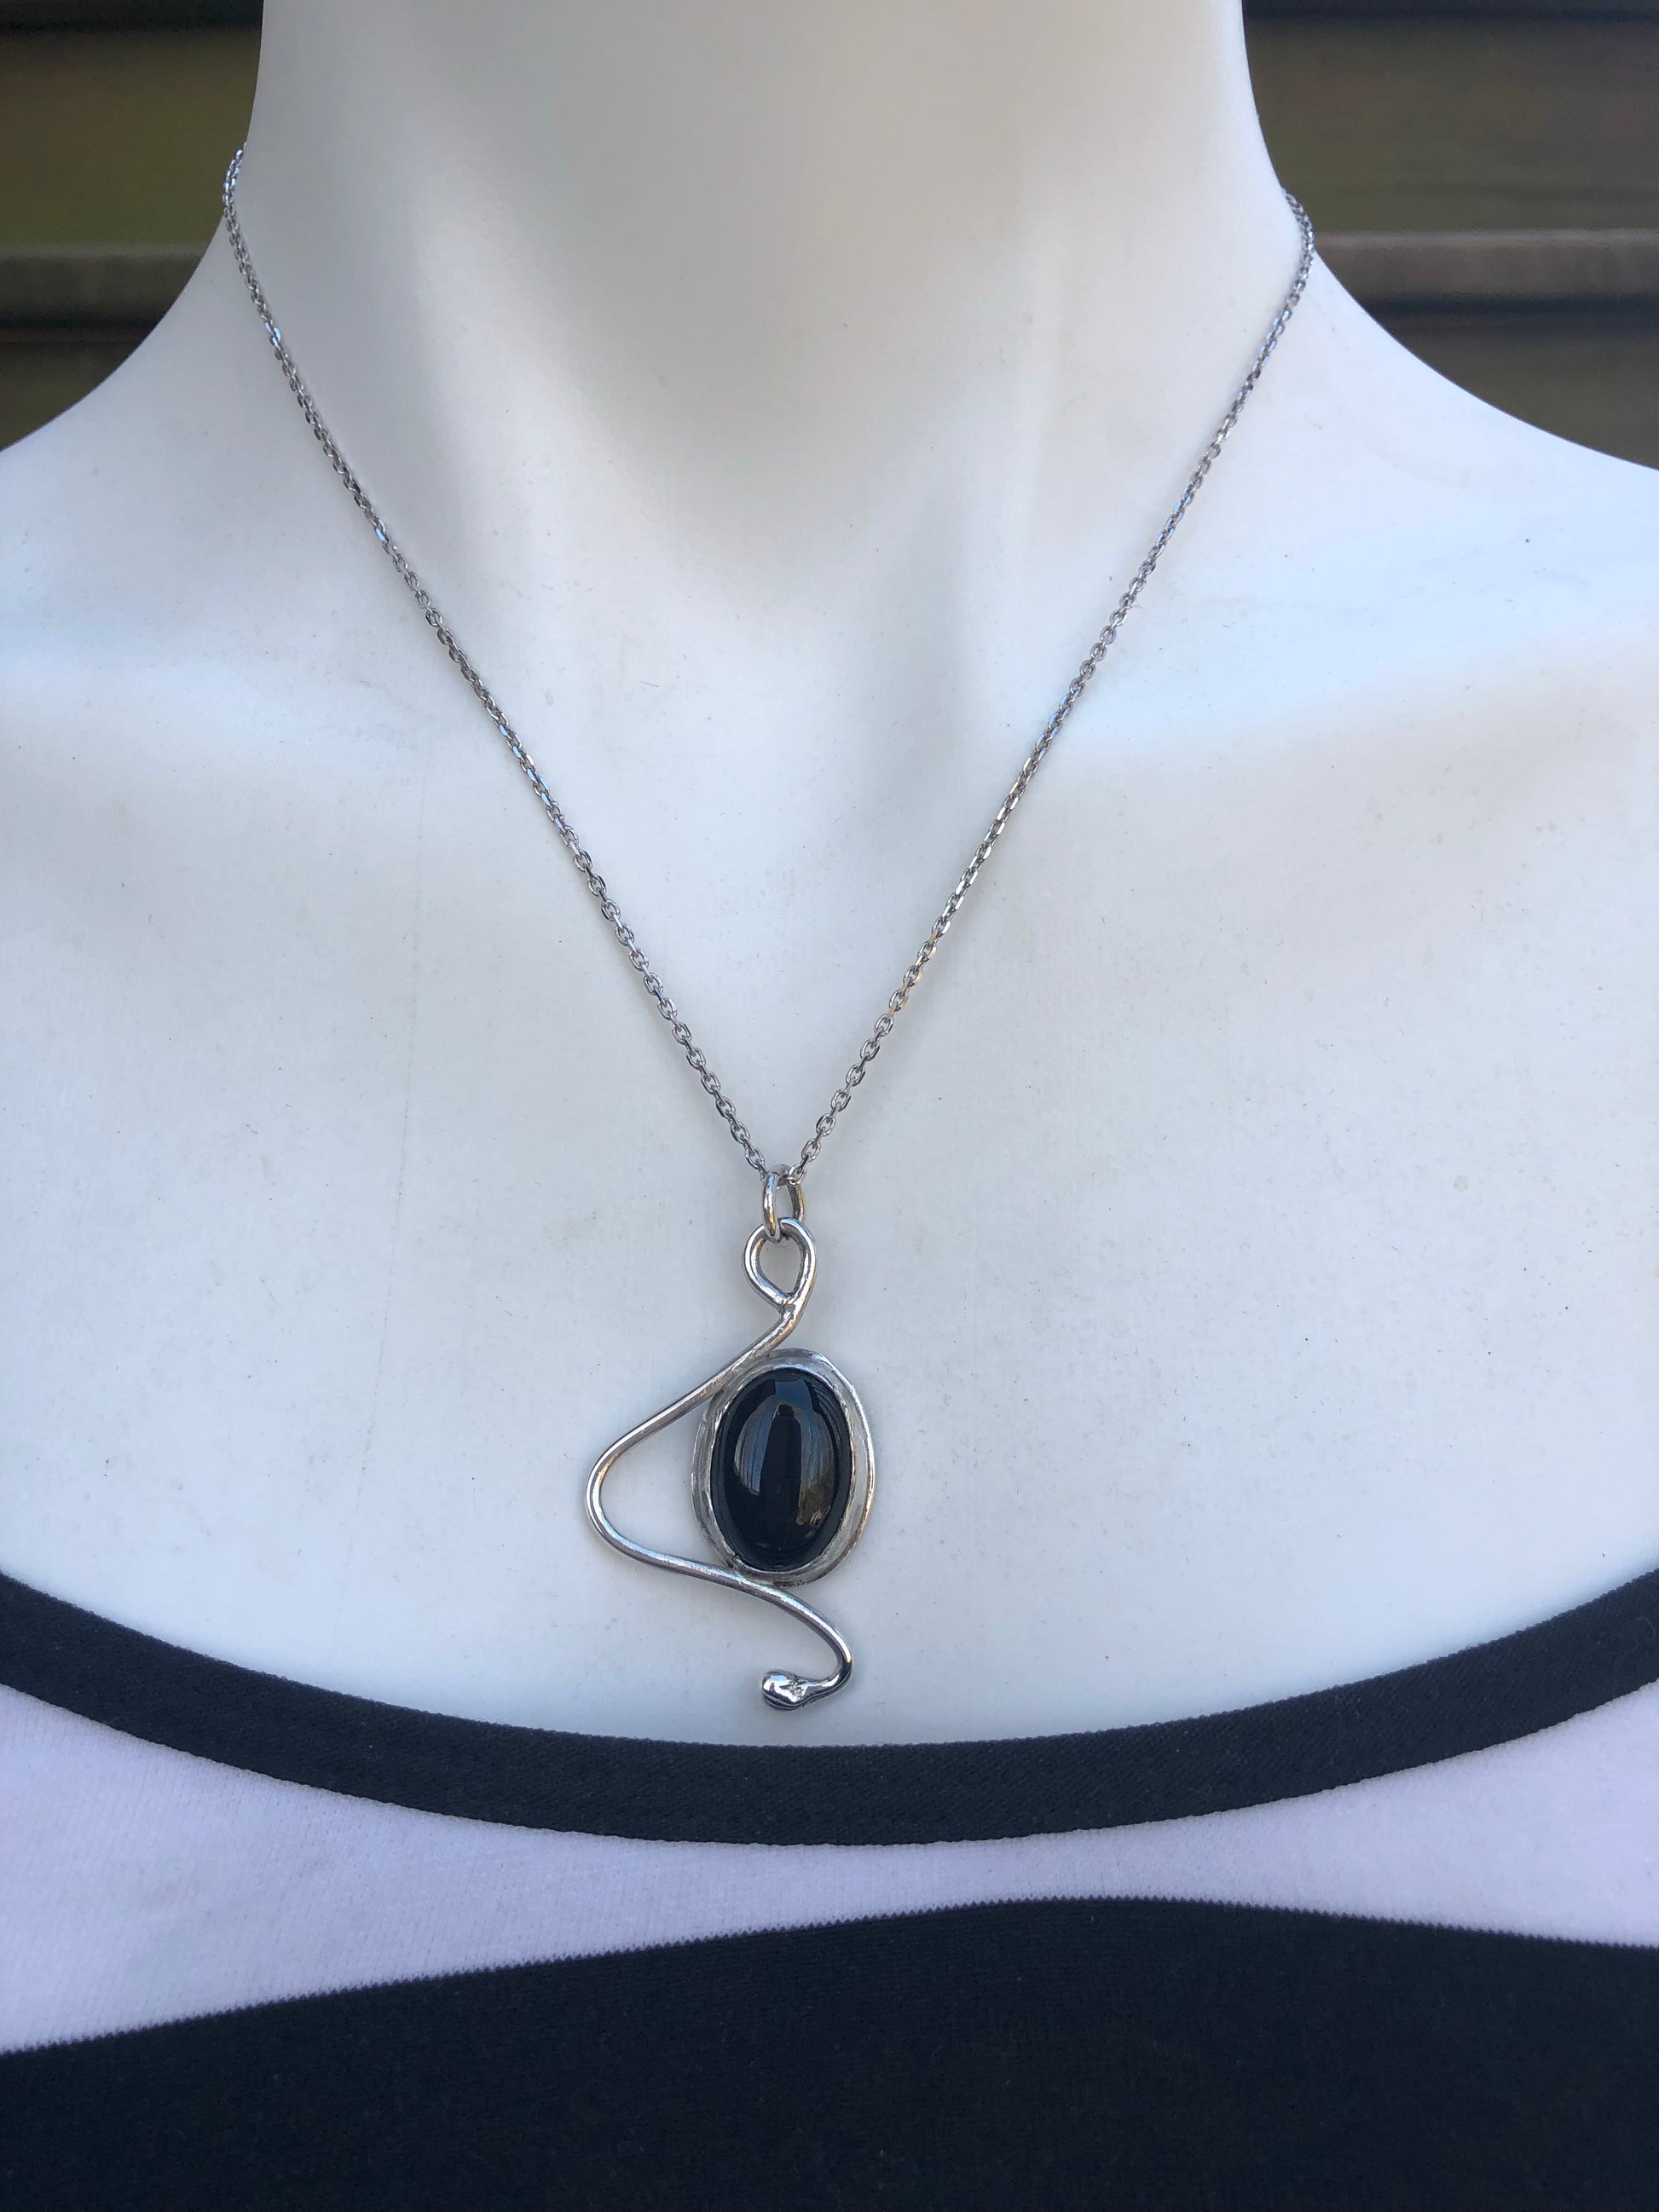 Sterling swirl necklace - collectionsbytracy.com